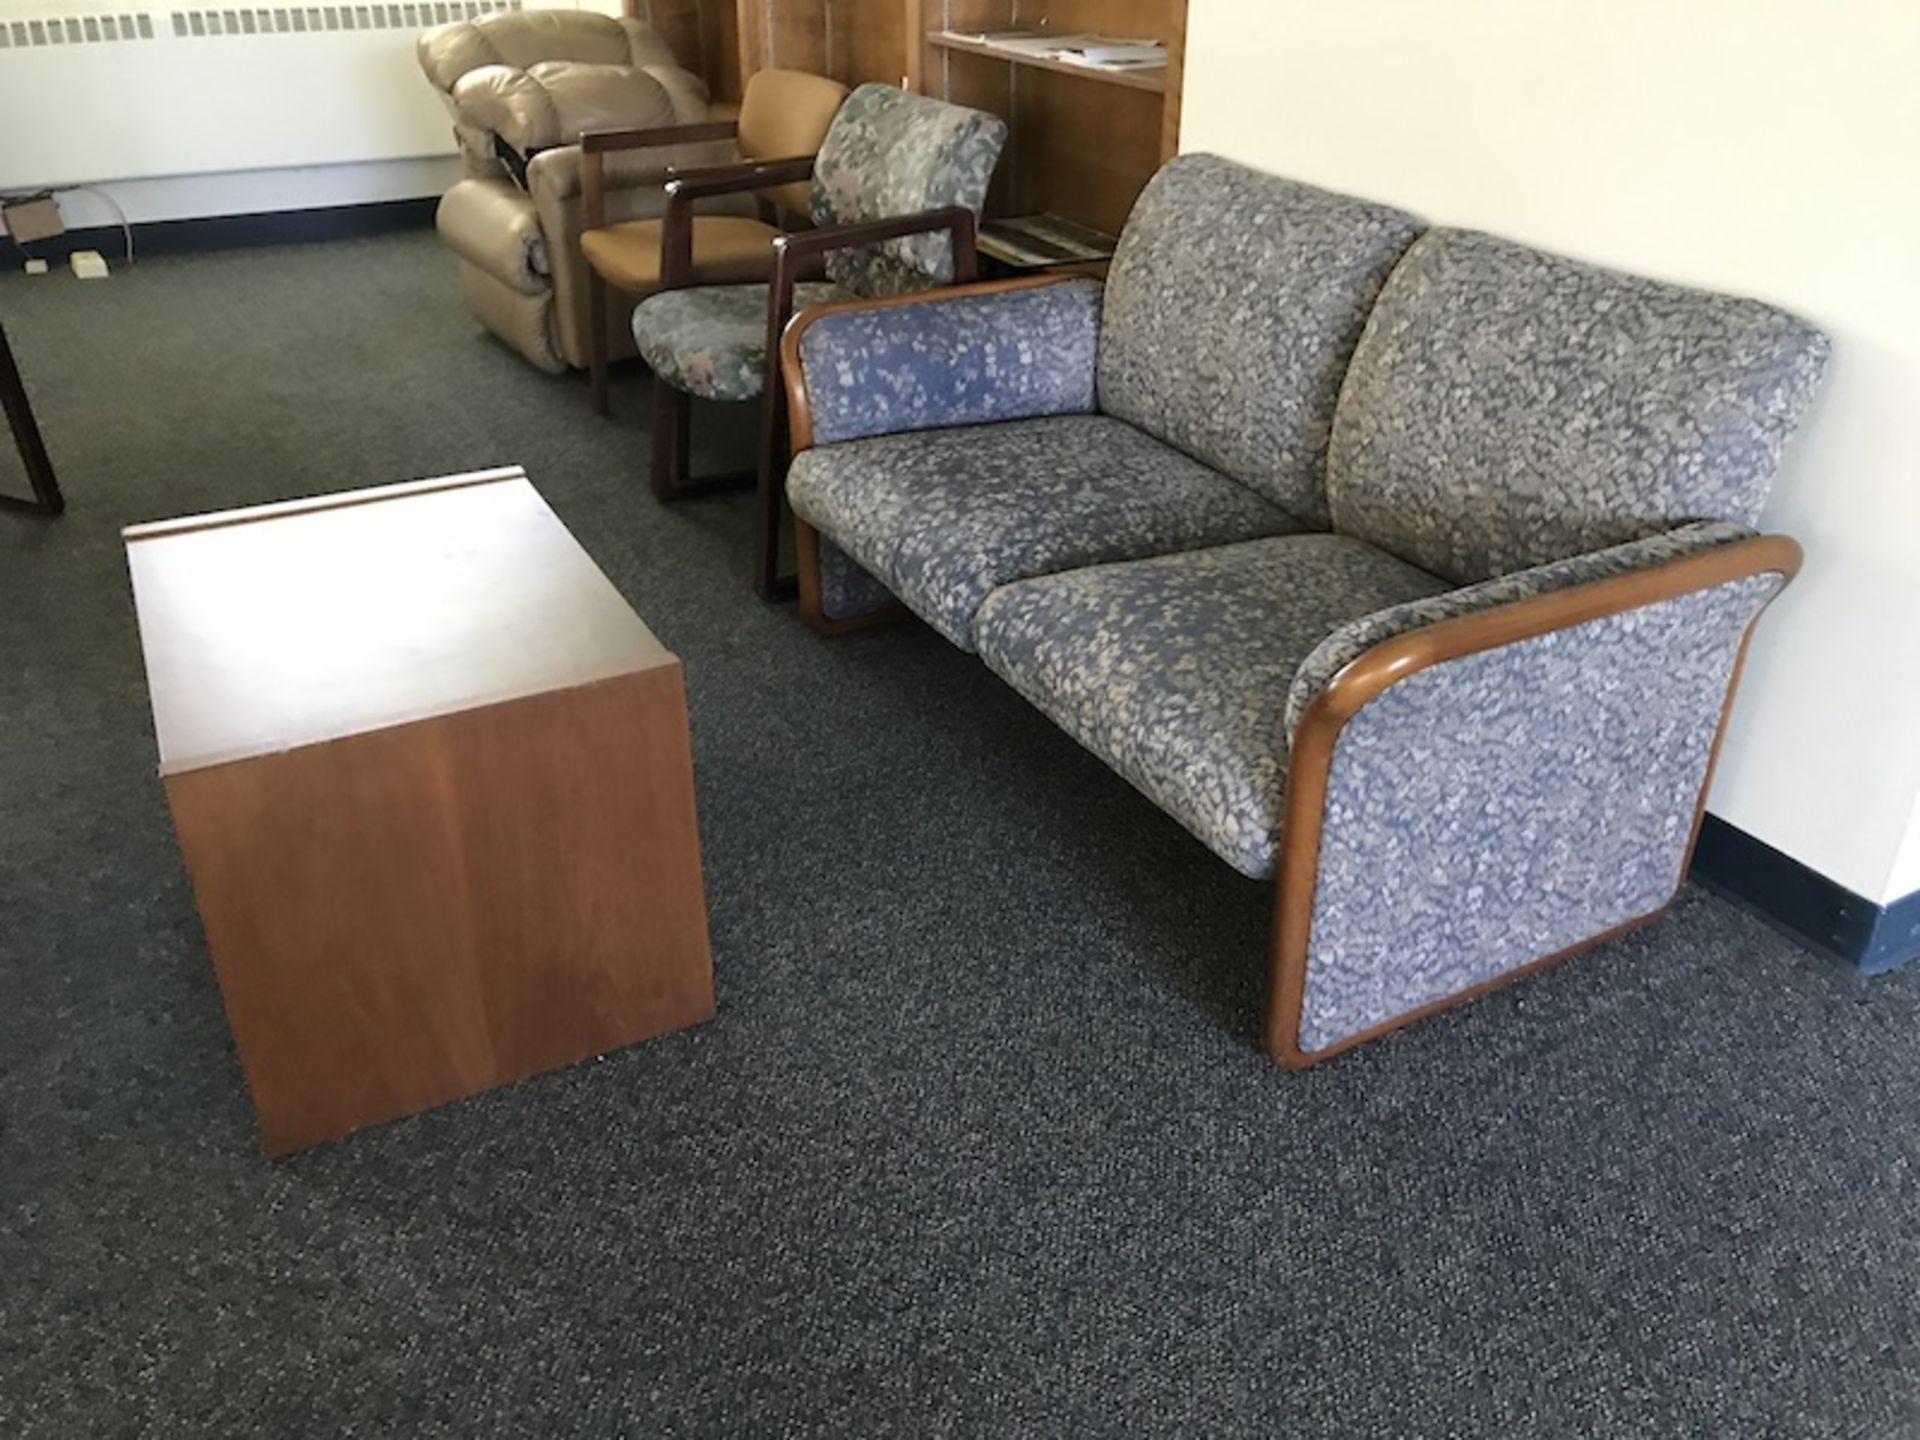 Contents of Faculty Lounge (Faculty Lounge) - Image 4 of 5